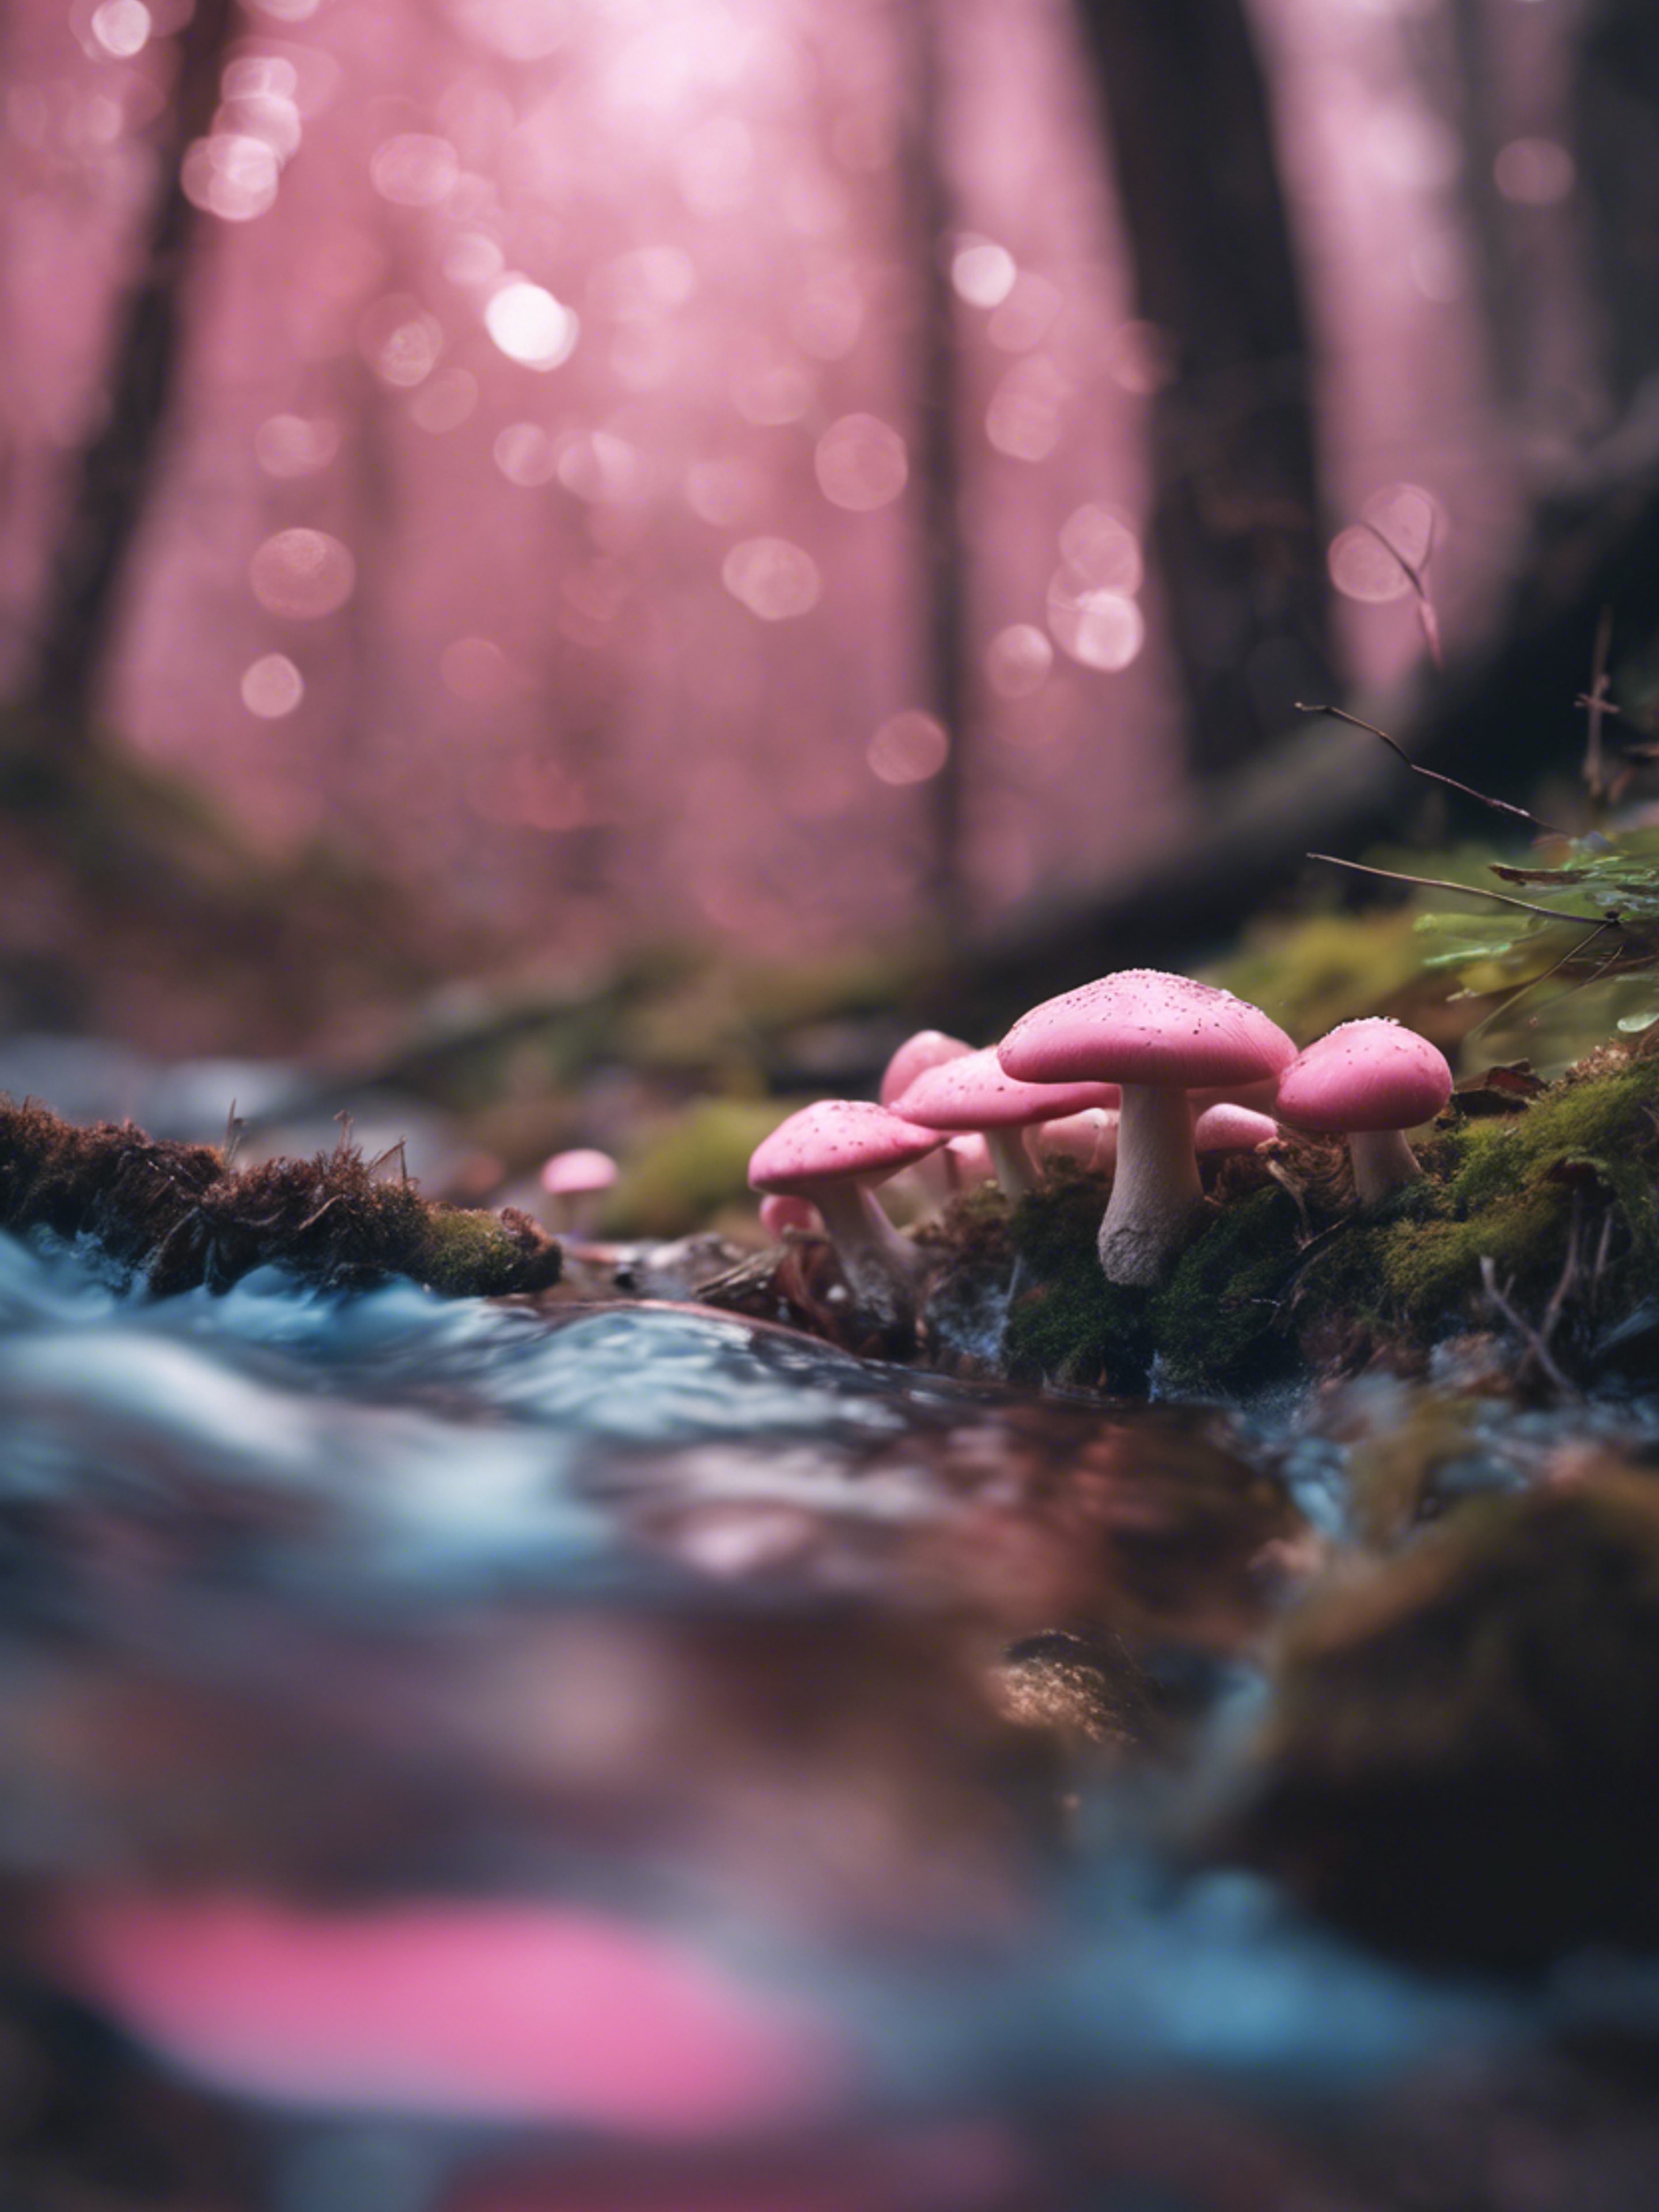 A scenic landscape of cute pink mushrooms growing next to a sparkling blue brook flowing through a mystic forest. 牆紙[15649bdf42124ca6856a]